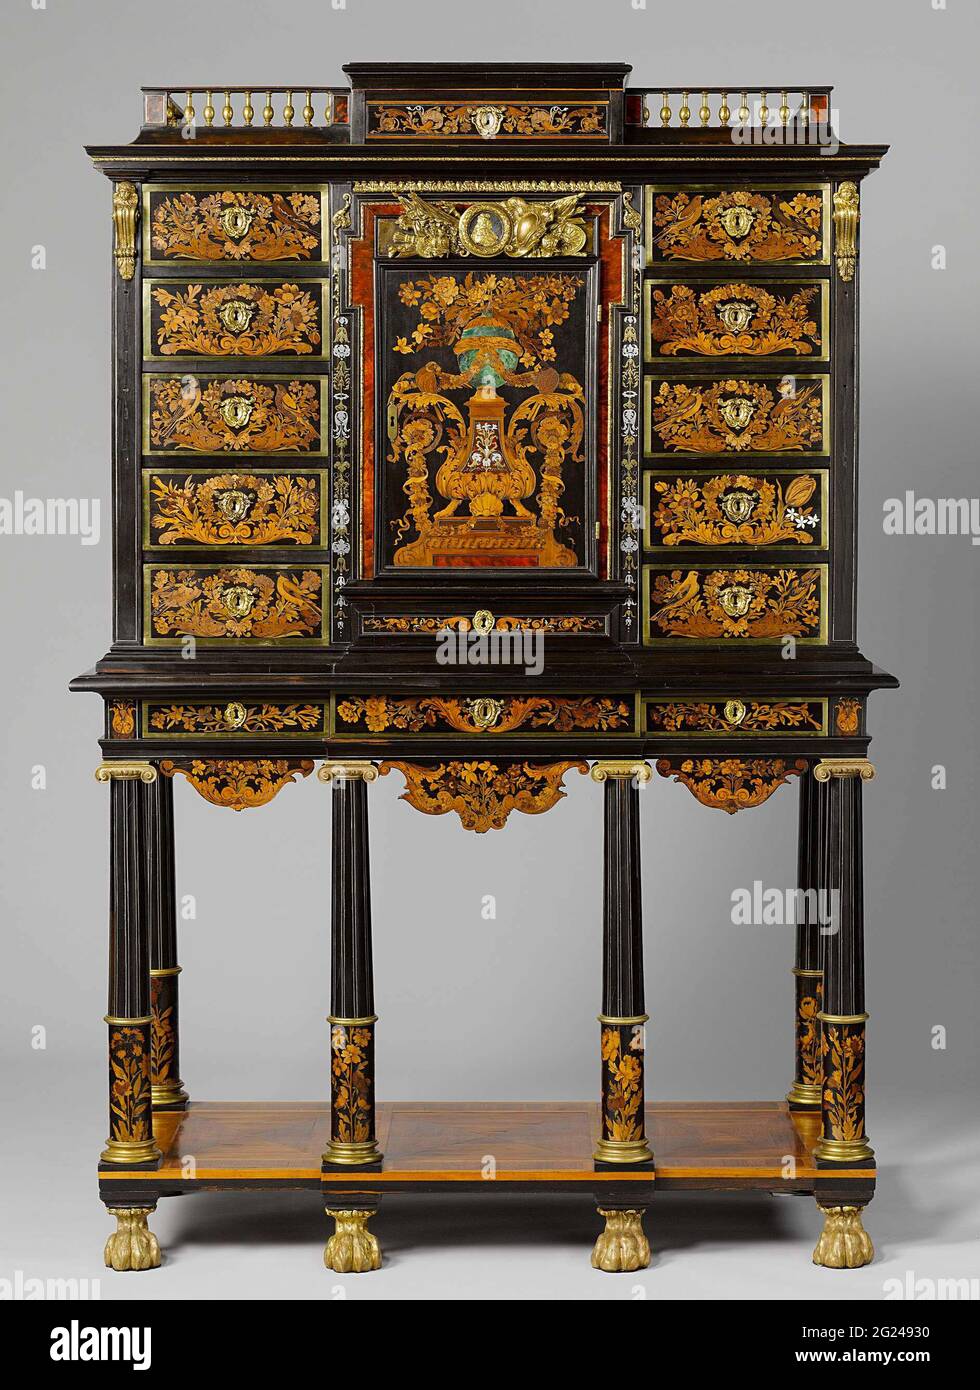 Cabinet. This may be the earliest-known masterpiece by Boulle, the most celebrated cabinetmaker of his time. Boulle perfected the technique of floral marquetry in various woods. The gilt-bronze armorial trophy above the middle door originally contained a portrait of Louis XIV. It was replaced with a likeness of King George I ofEngland (1660–1727). Stock Photo